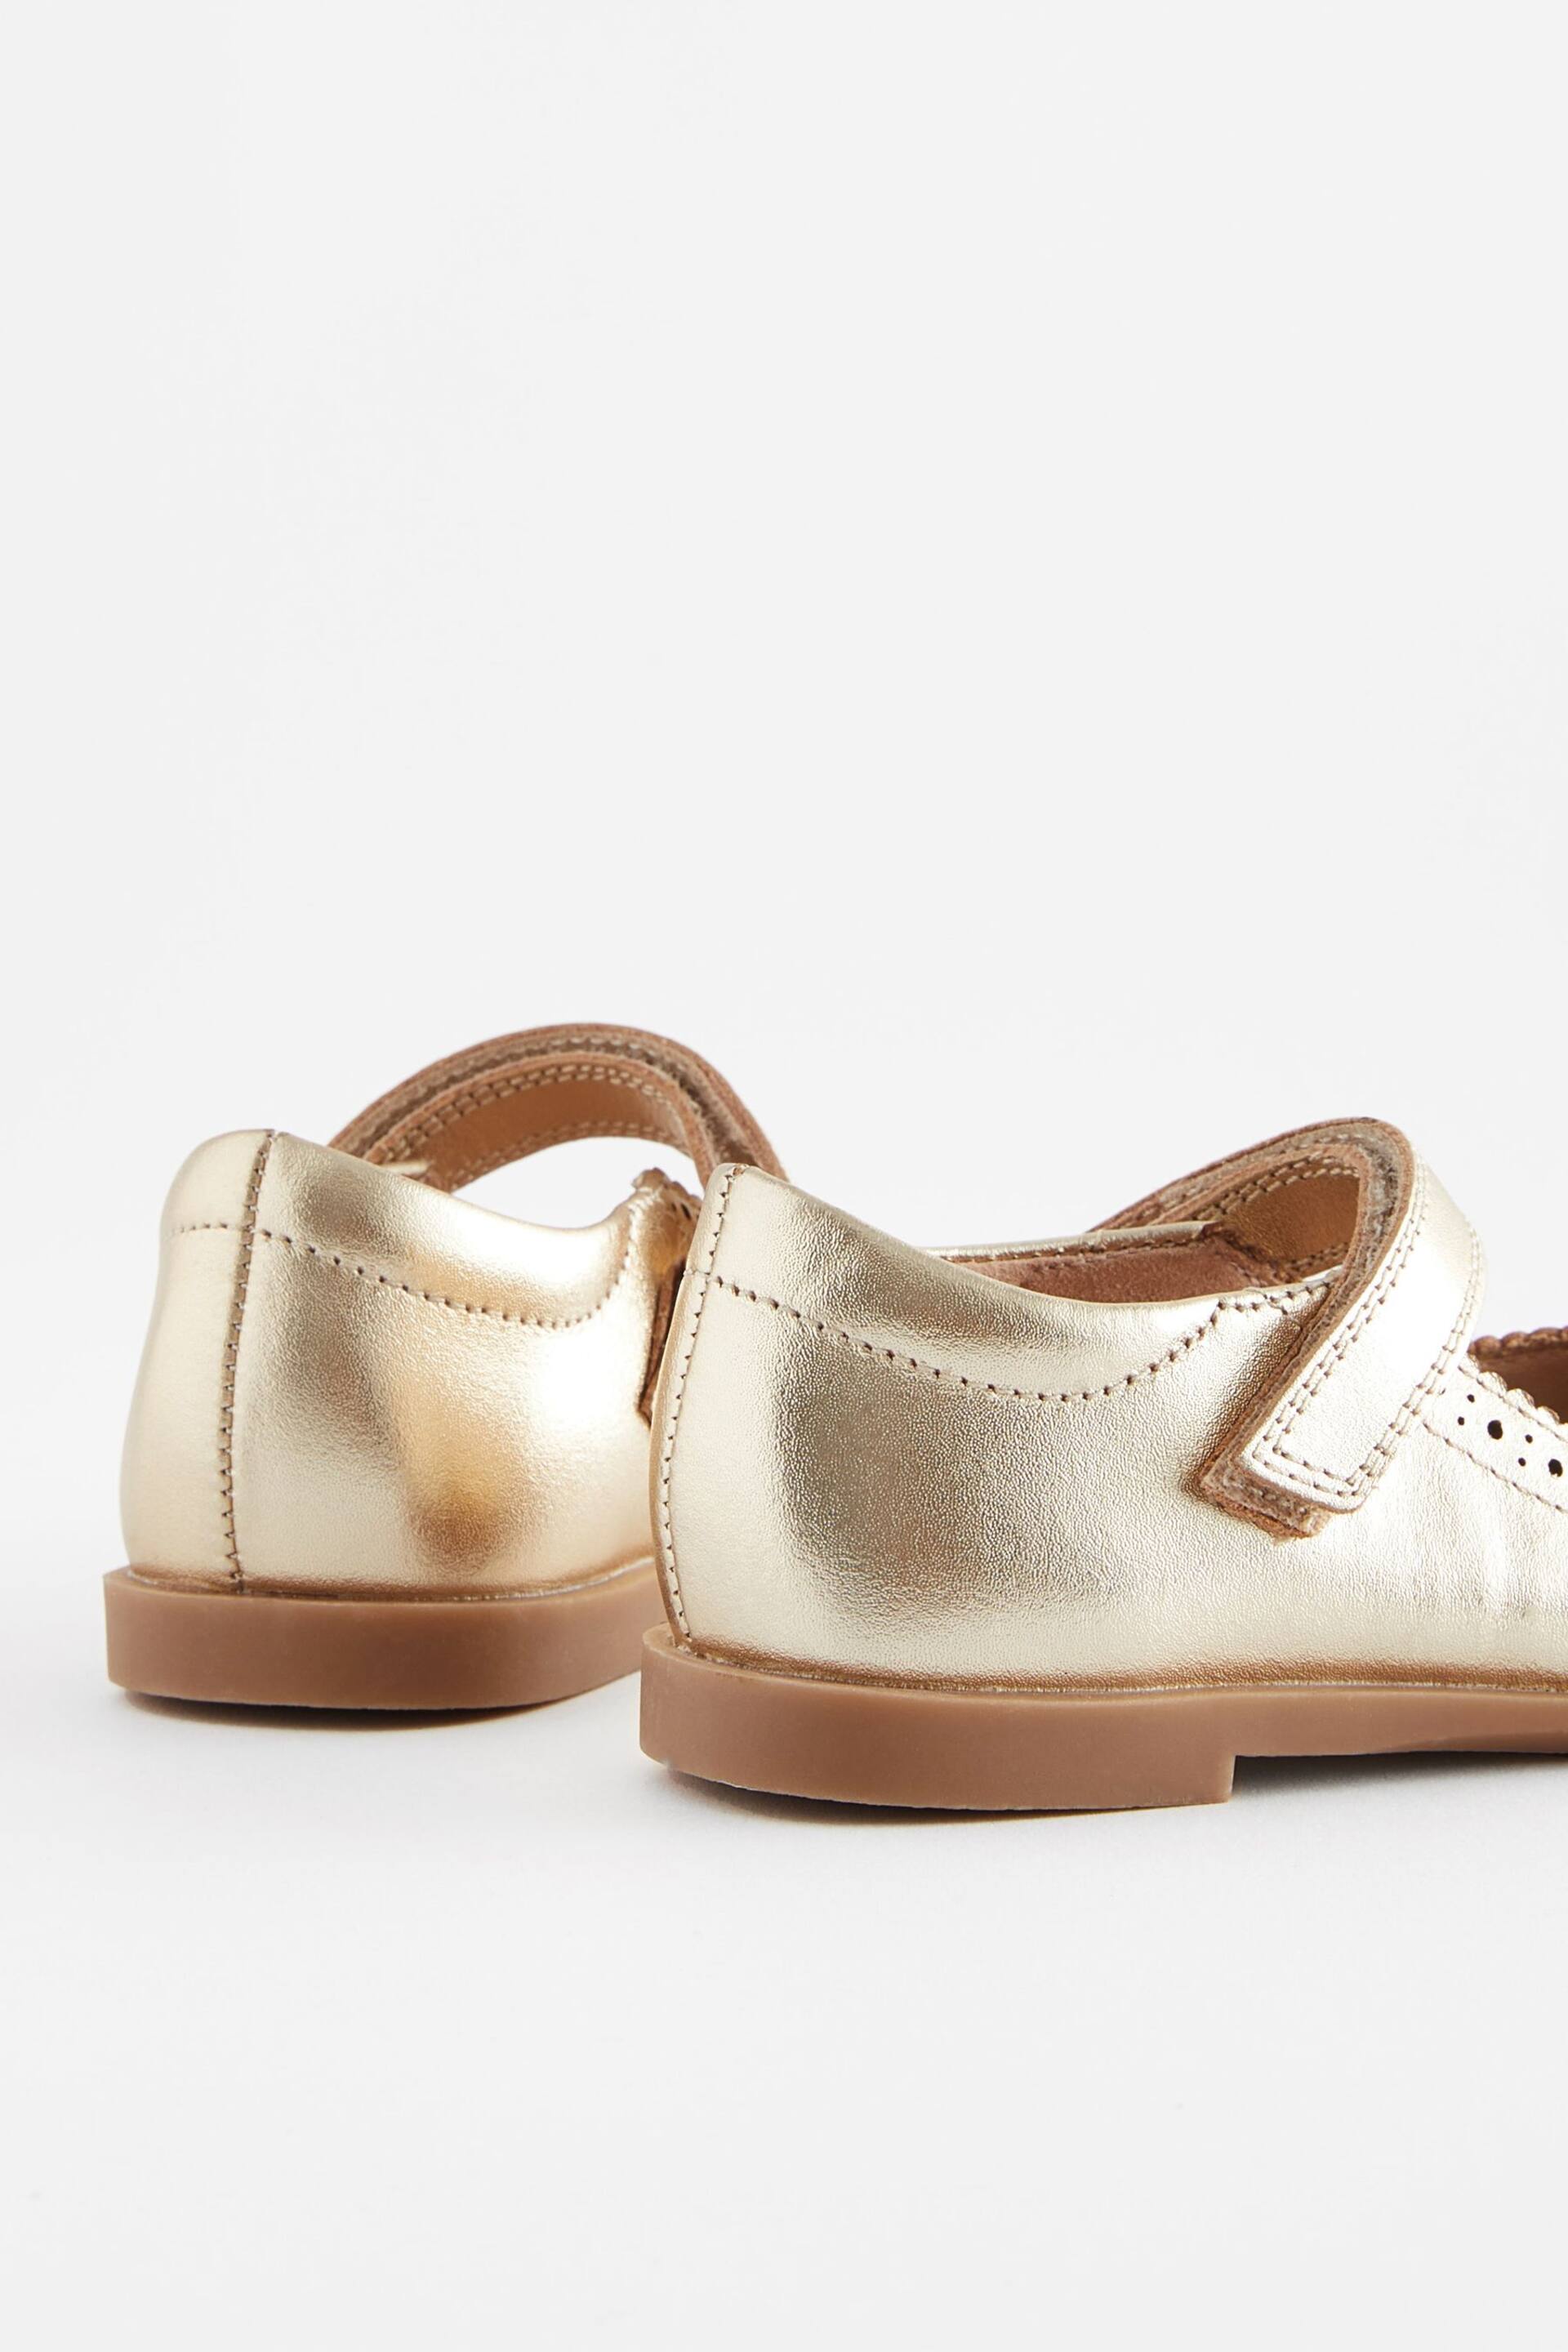 Gold Leather Leather Mary Jane Brogues - Image 4 of 5